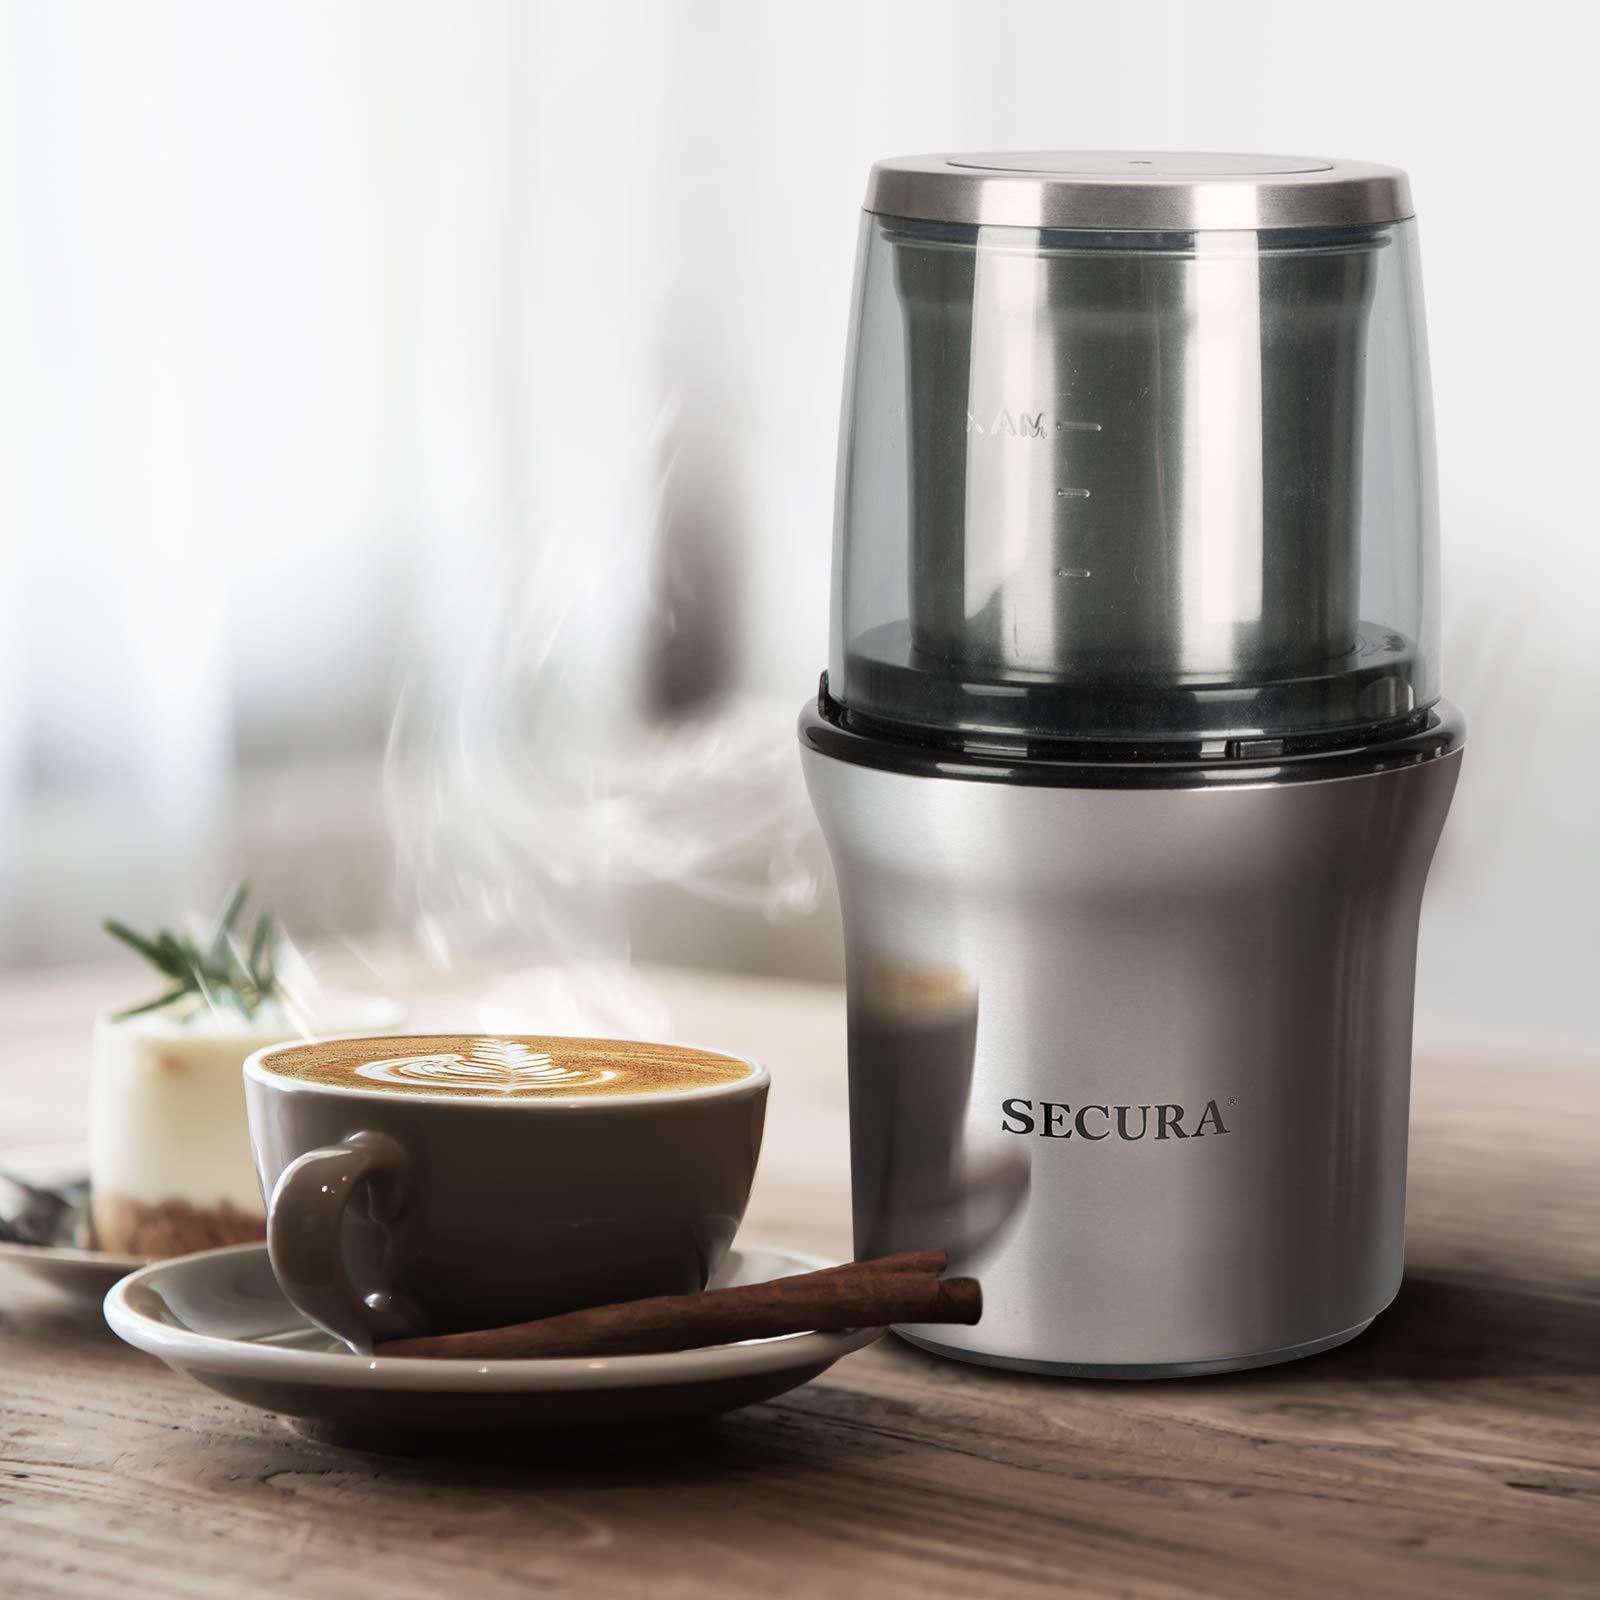 Secura Adjustable Coffee Grinder Electric, Spice Grinder Electric, Coffee  Bean Grinder, Multipurpose Grinder for Spices, Herbs, Nuts, Grains with 1